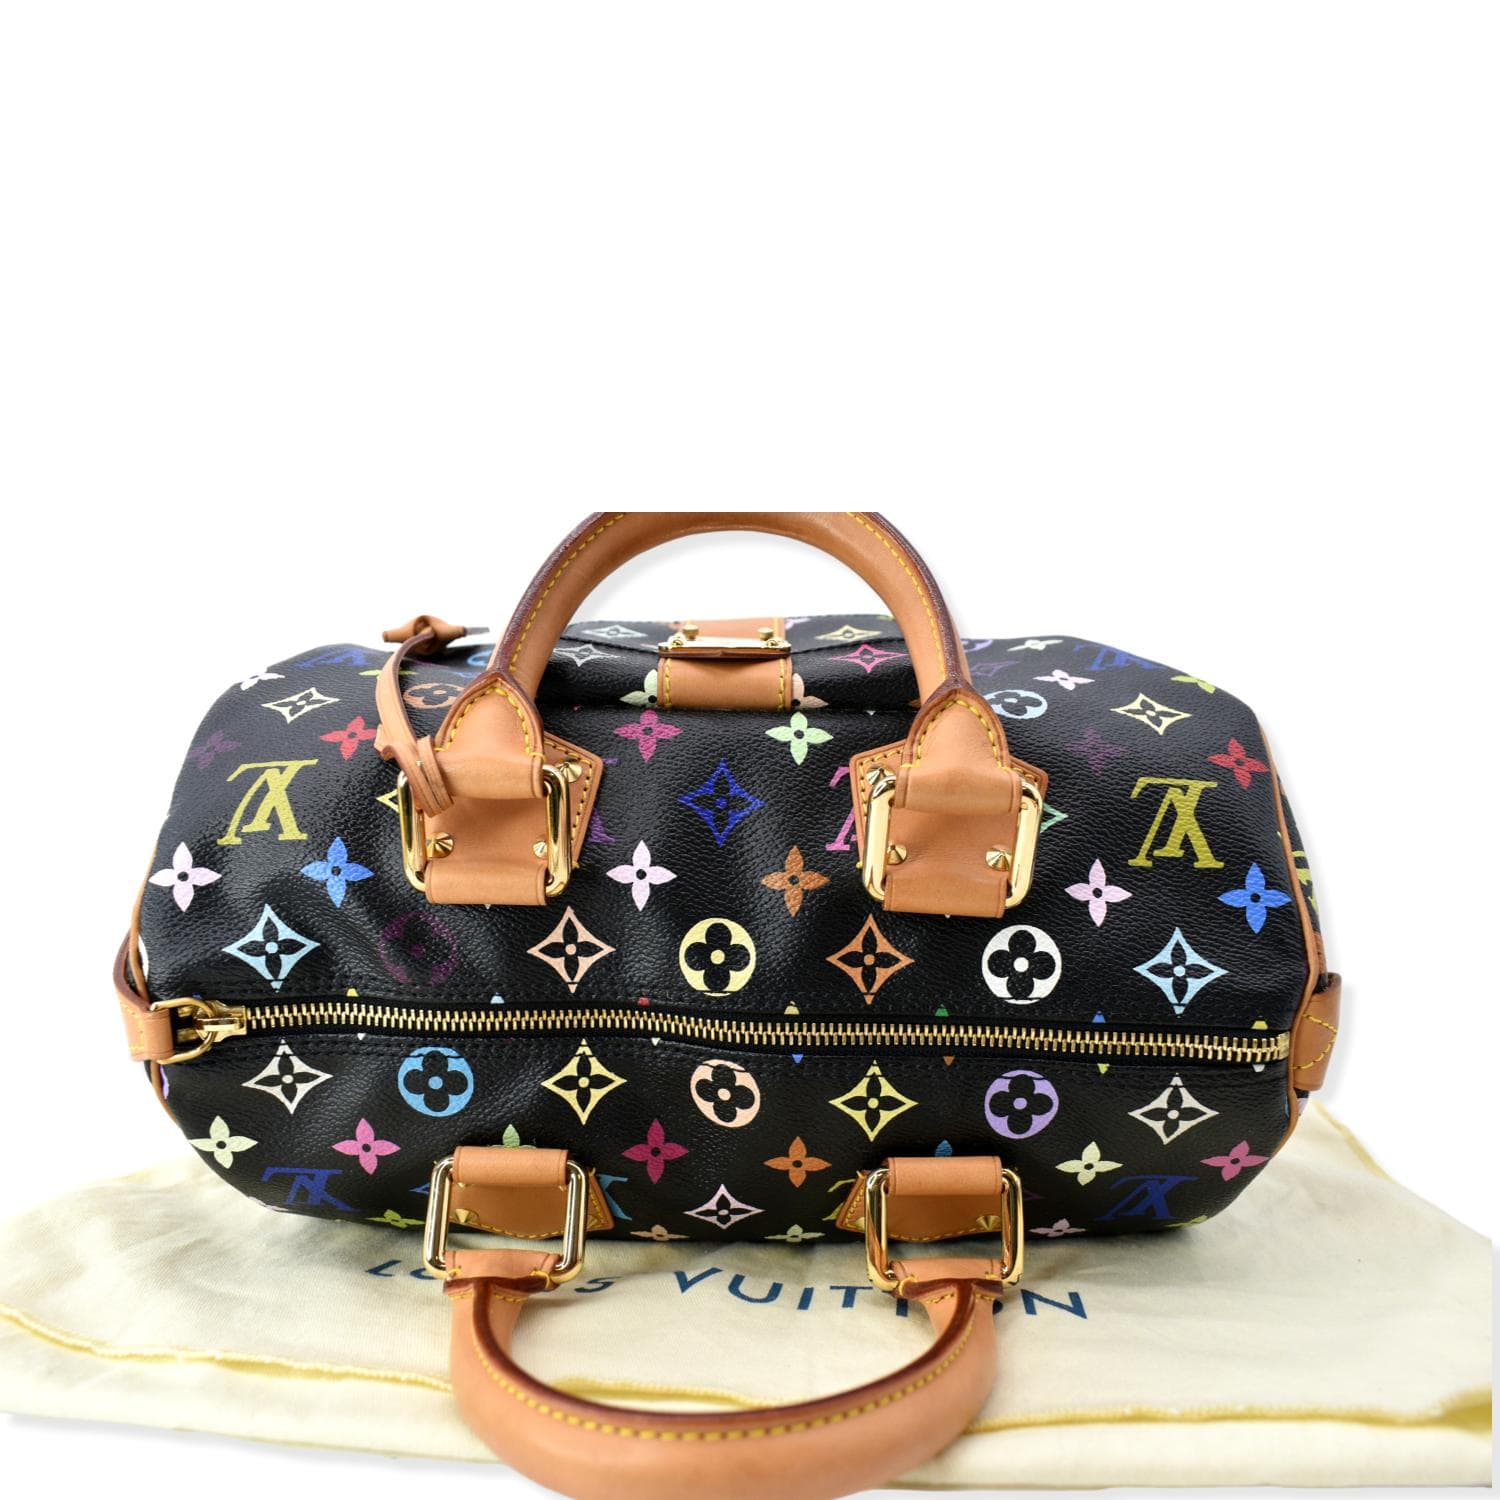 The Lady Bag - Let this limited edition LV Speedy be your summer statement!  🌸🌞Put this Louis Vuitton Speedy on 60 day layaway or finance it! #summer  #summerstyle #louisvuitton #louisvuittonforsale